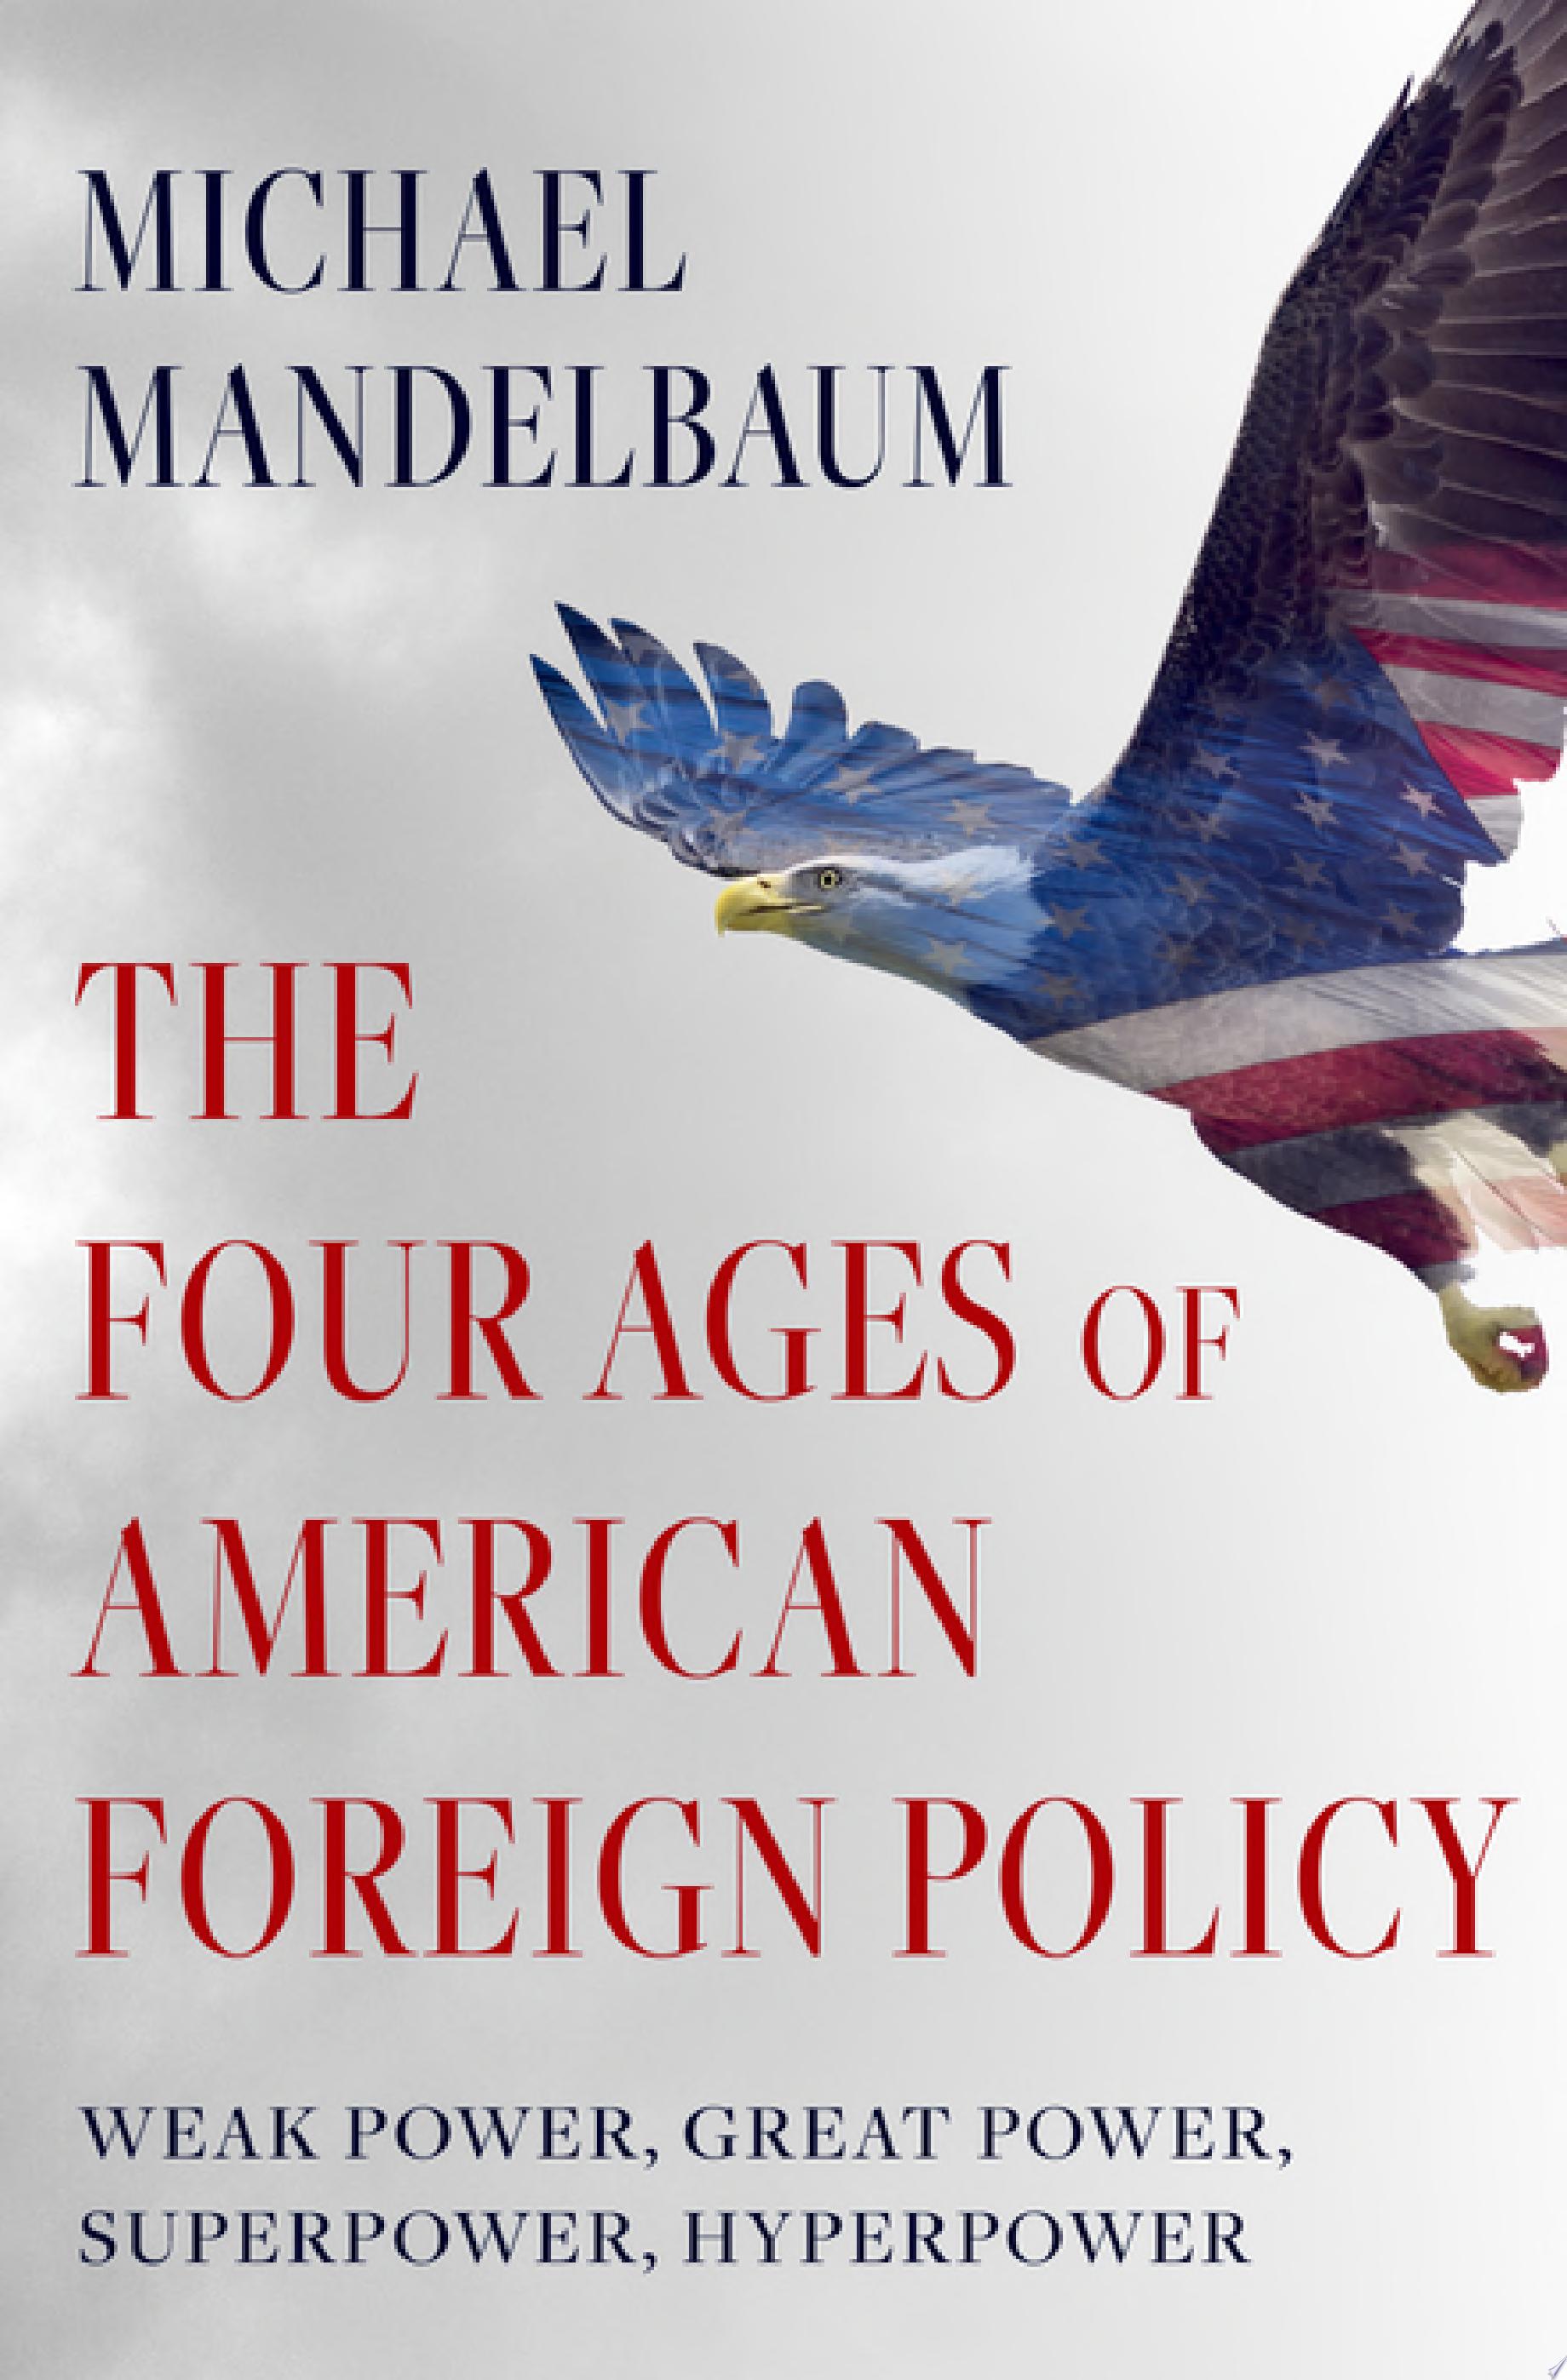 Image for "The Four Ages of American Foreign Policy"